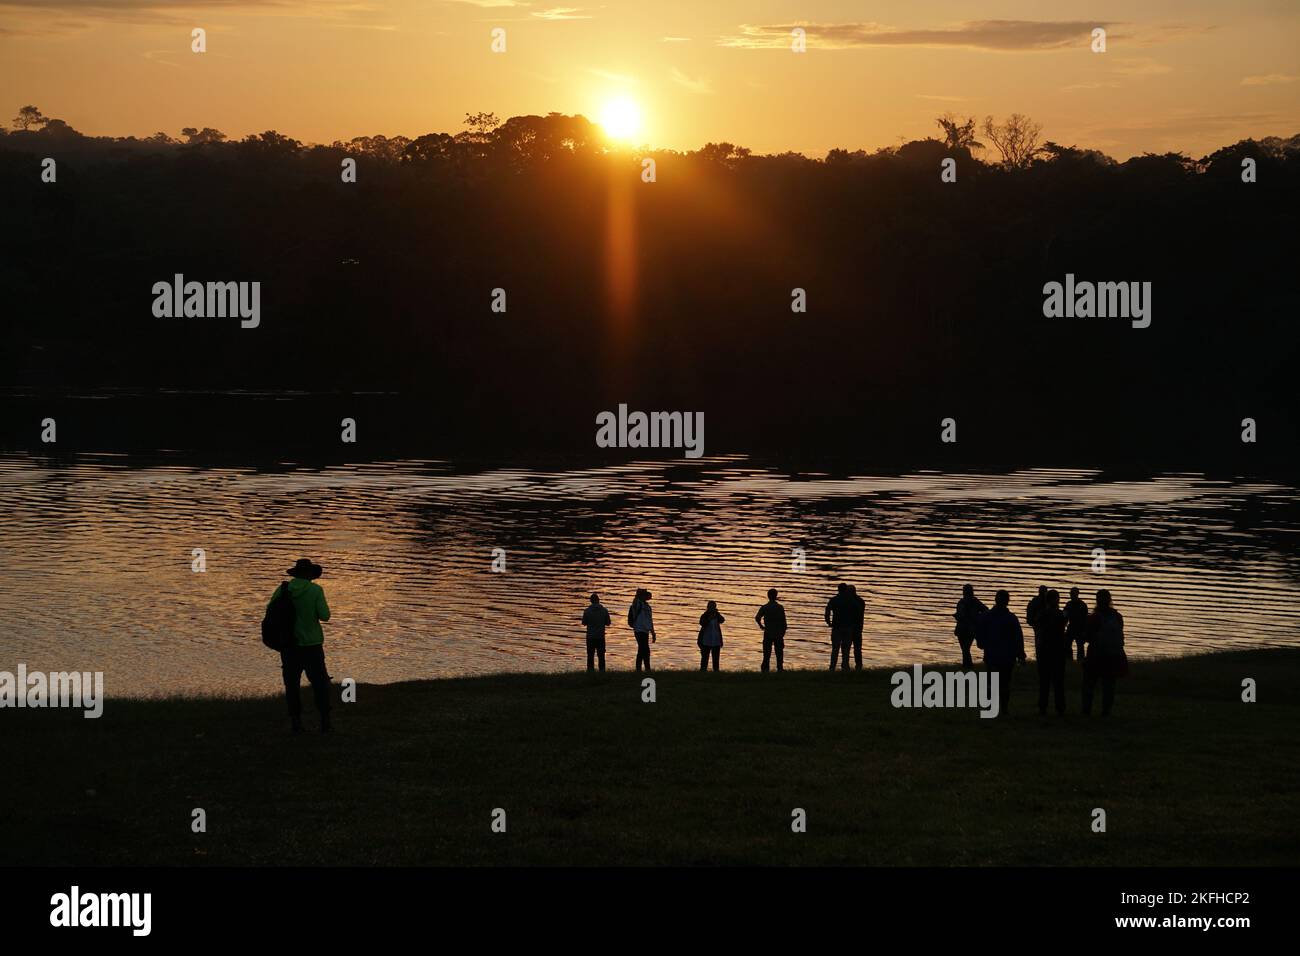 People watching a sunset in Vaupes River, Colombia Stock Photo